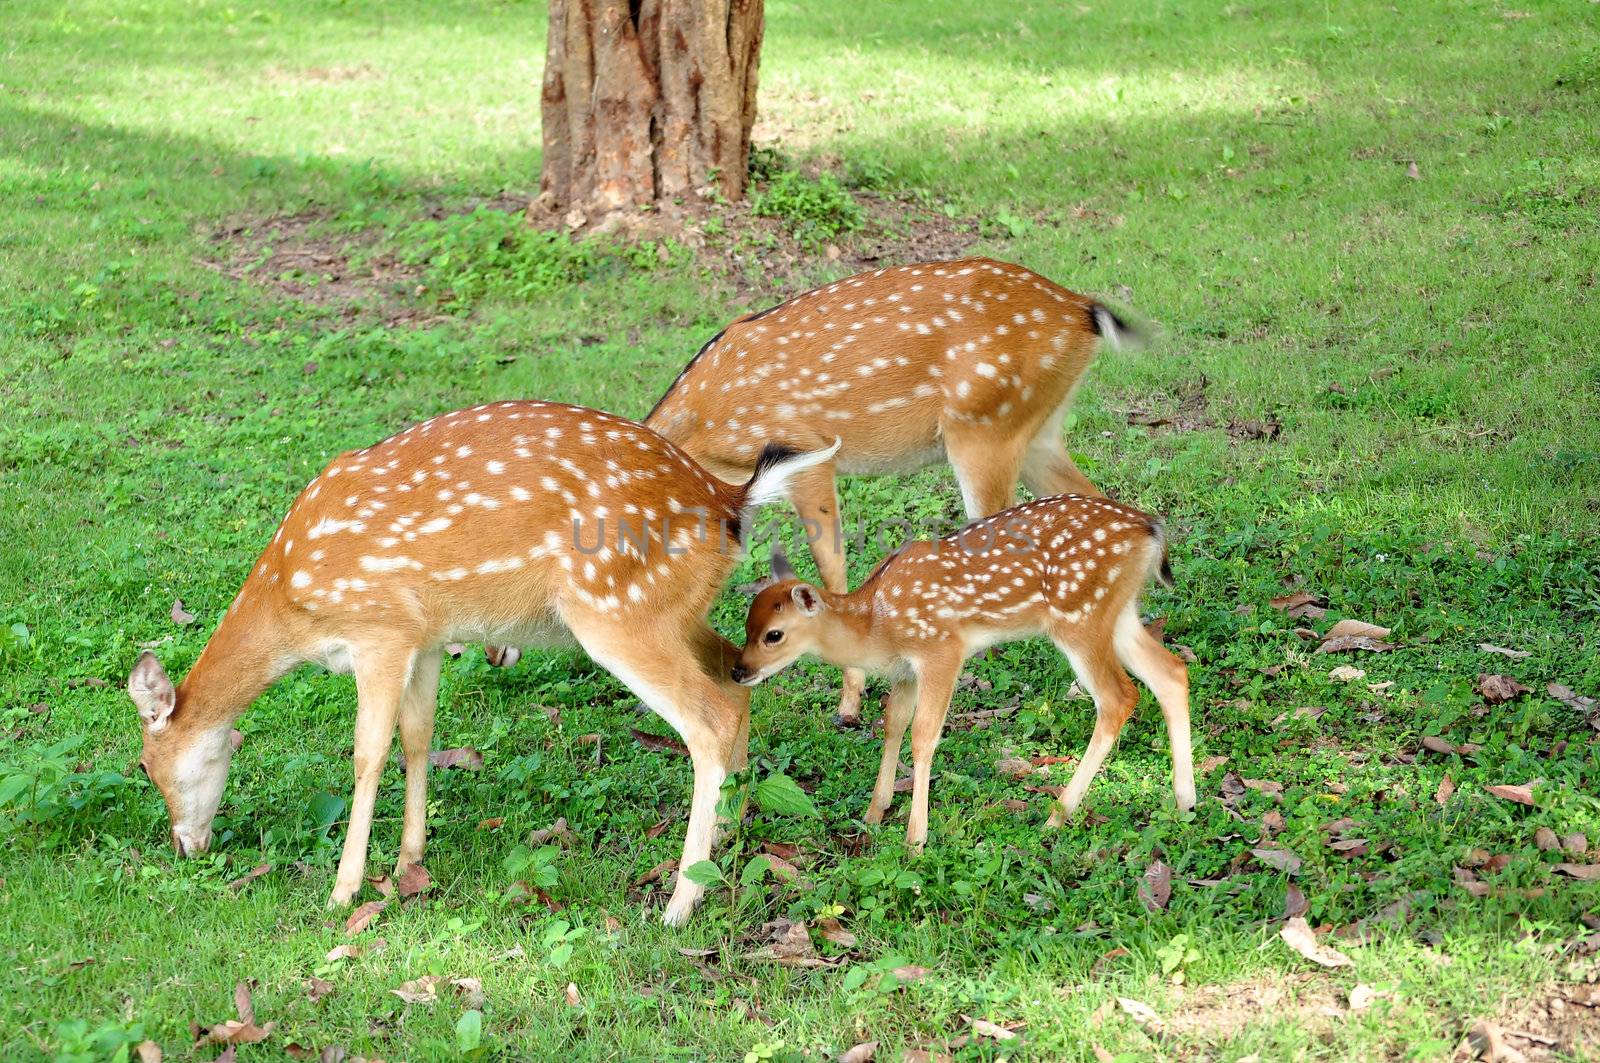 The Sika Deer, Cervus nippon, also known as the Spotted Deer or the Japanese Deer, is a species of deer native to much of East Asia and introduced to various other parts of the world.